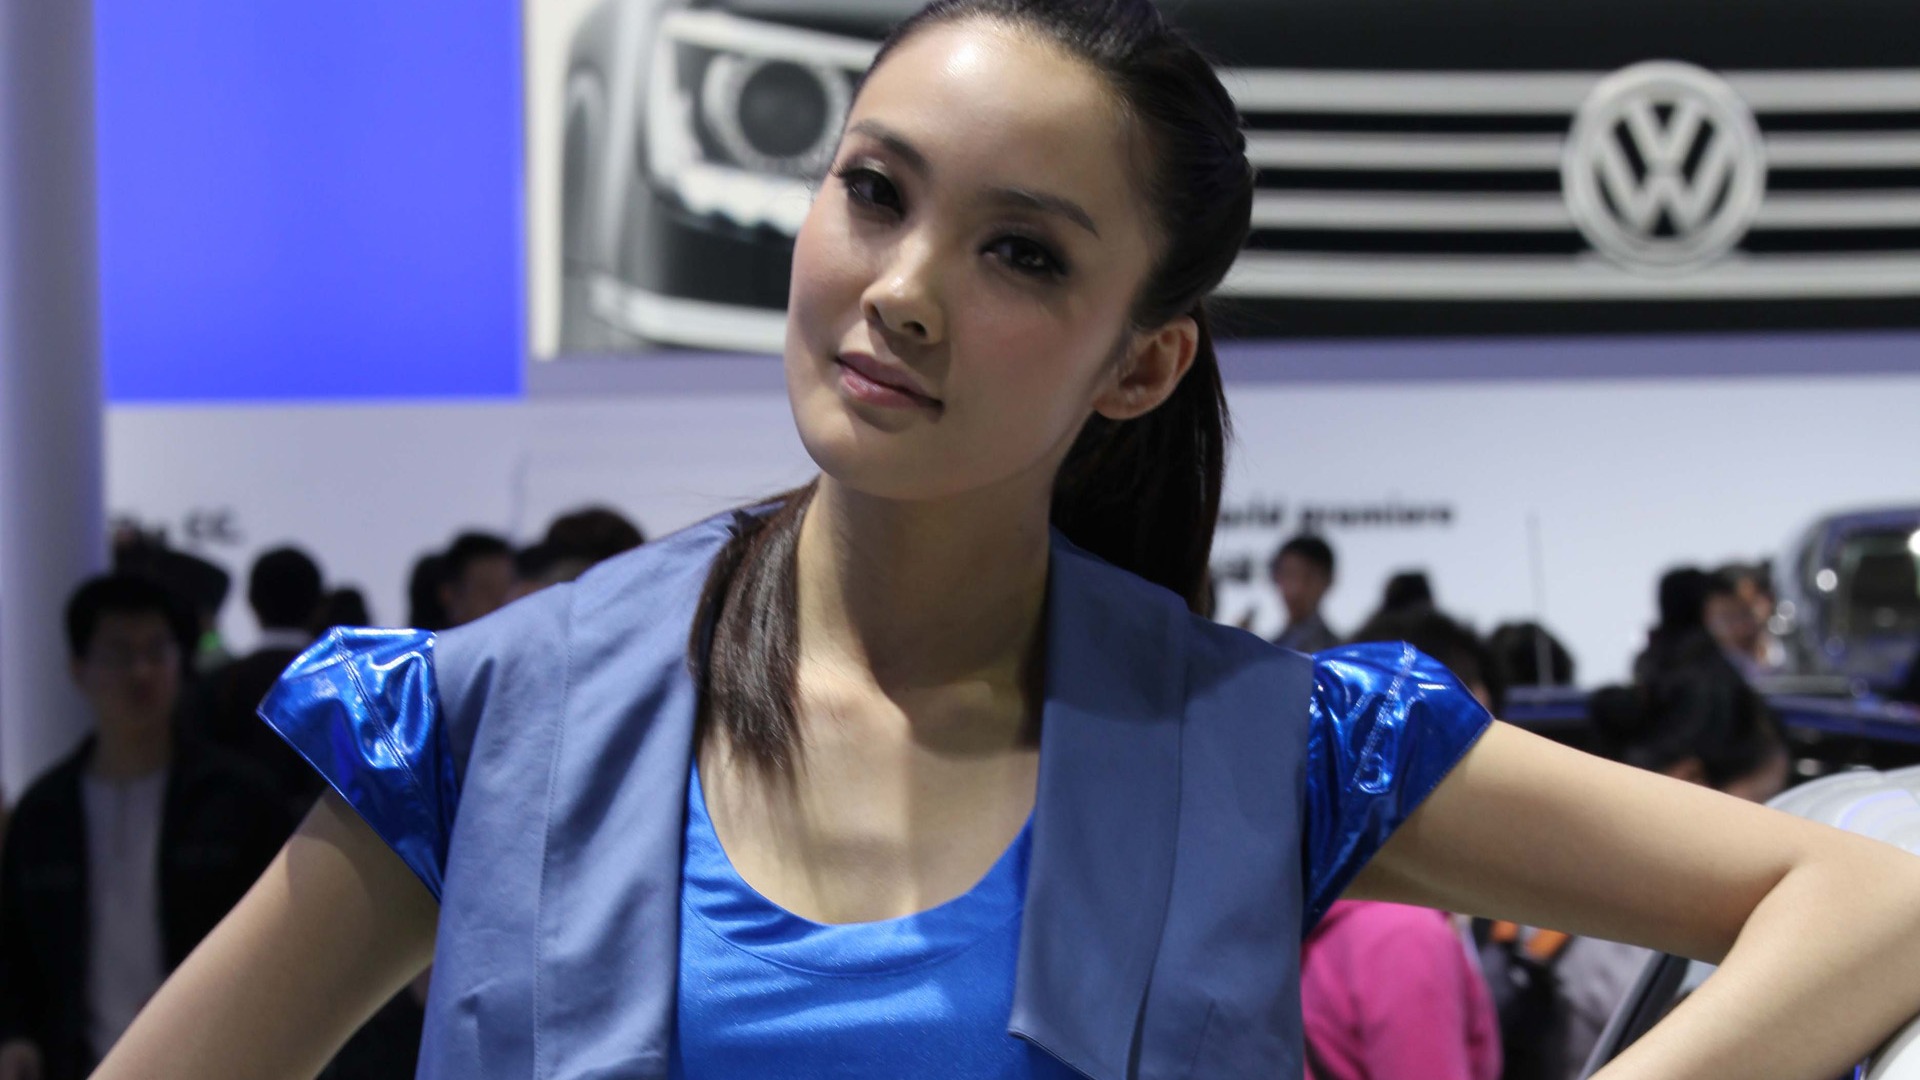 2010 Beijing International Auto Show beauty (2) (the wind chasing the clouds works) #7 - 1920x1080